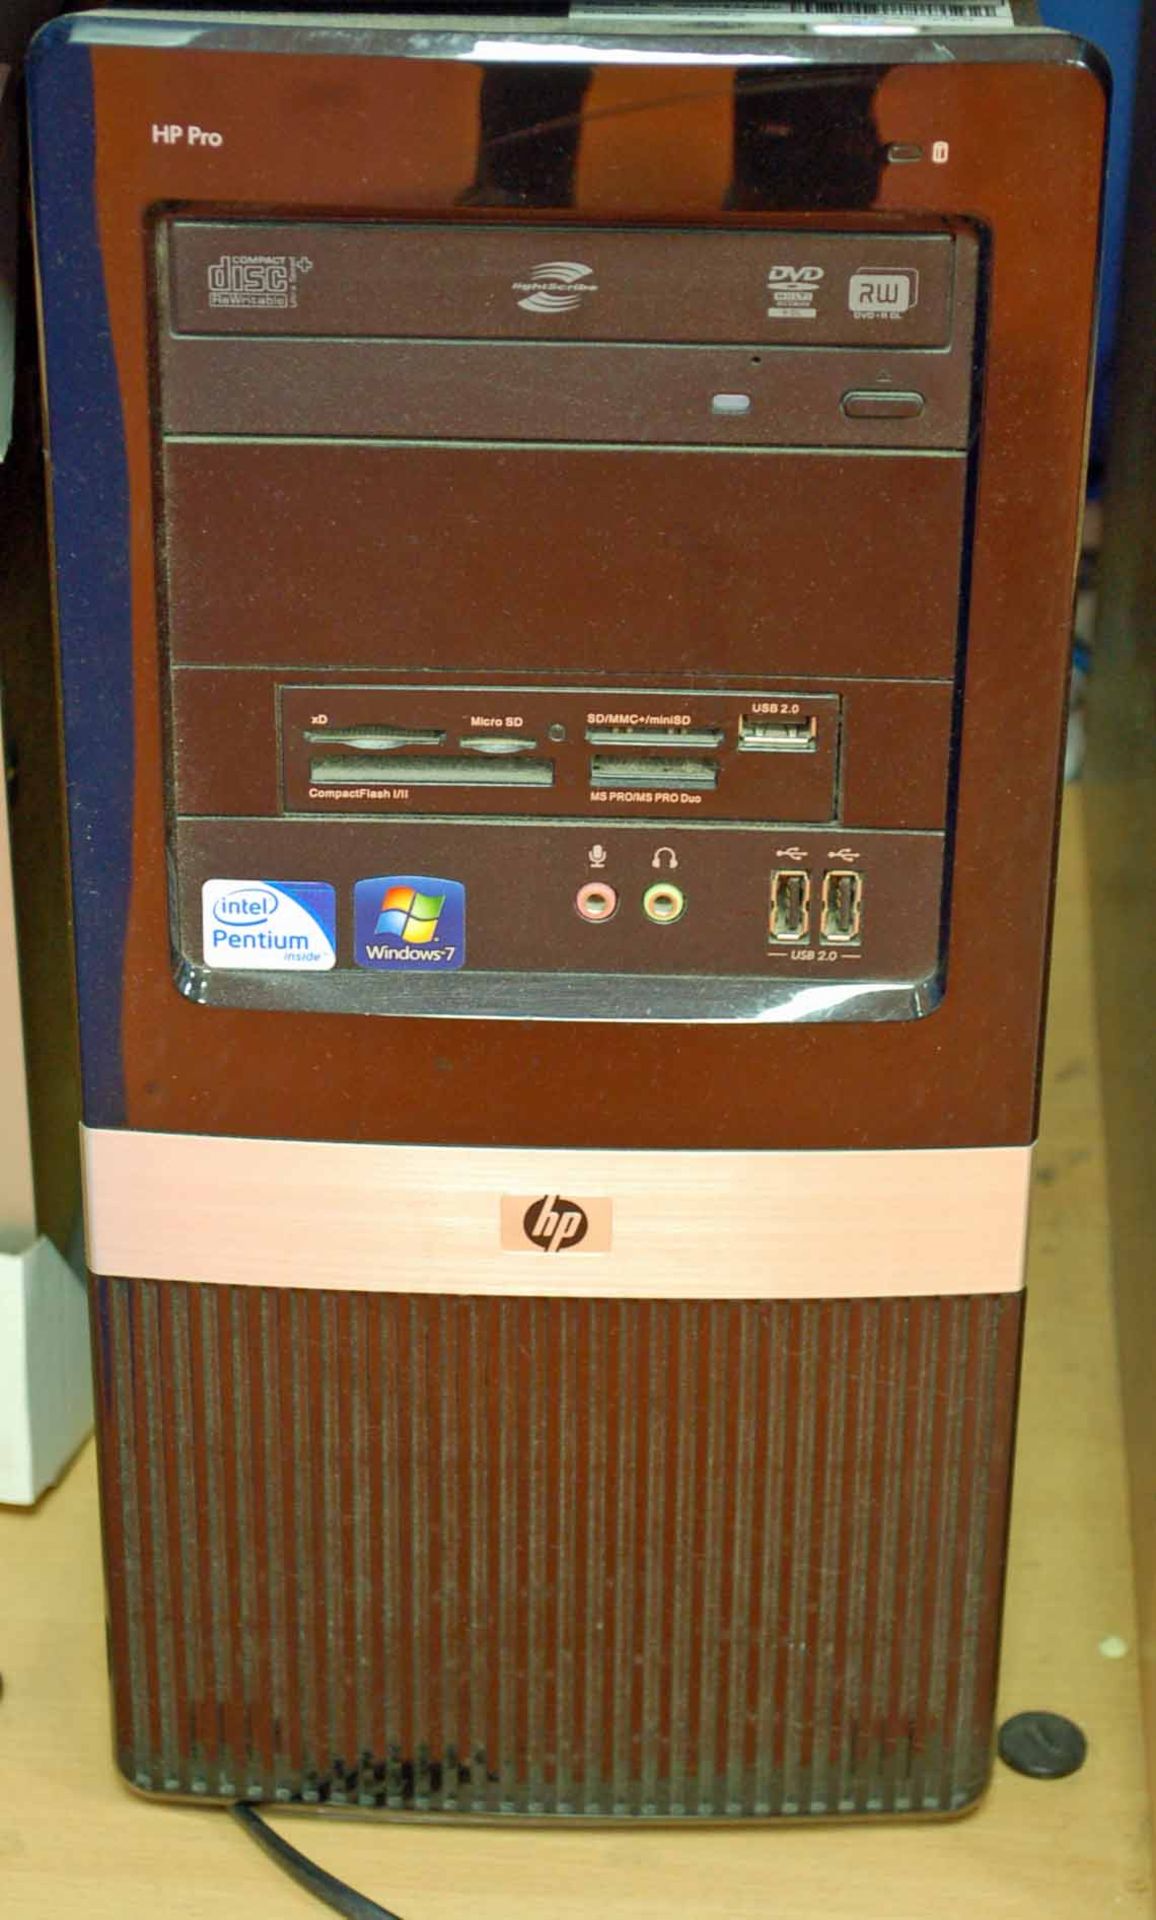 The I.T. Computers and Business Equipment including: Six HEWLETT PACKARD Pro 3100 Series Minitower - Image 5 of 5